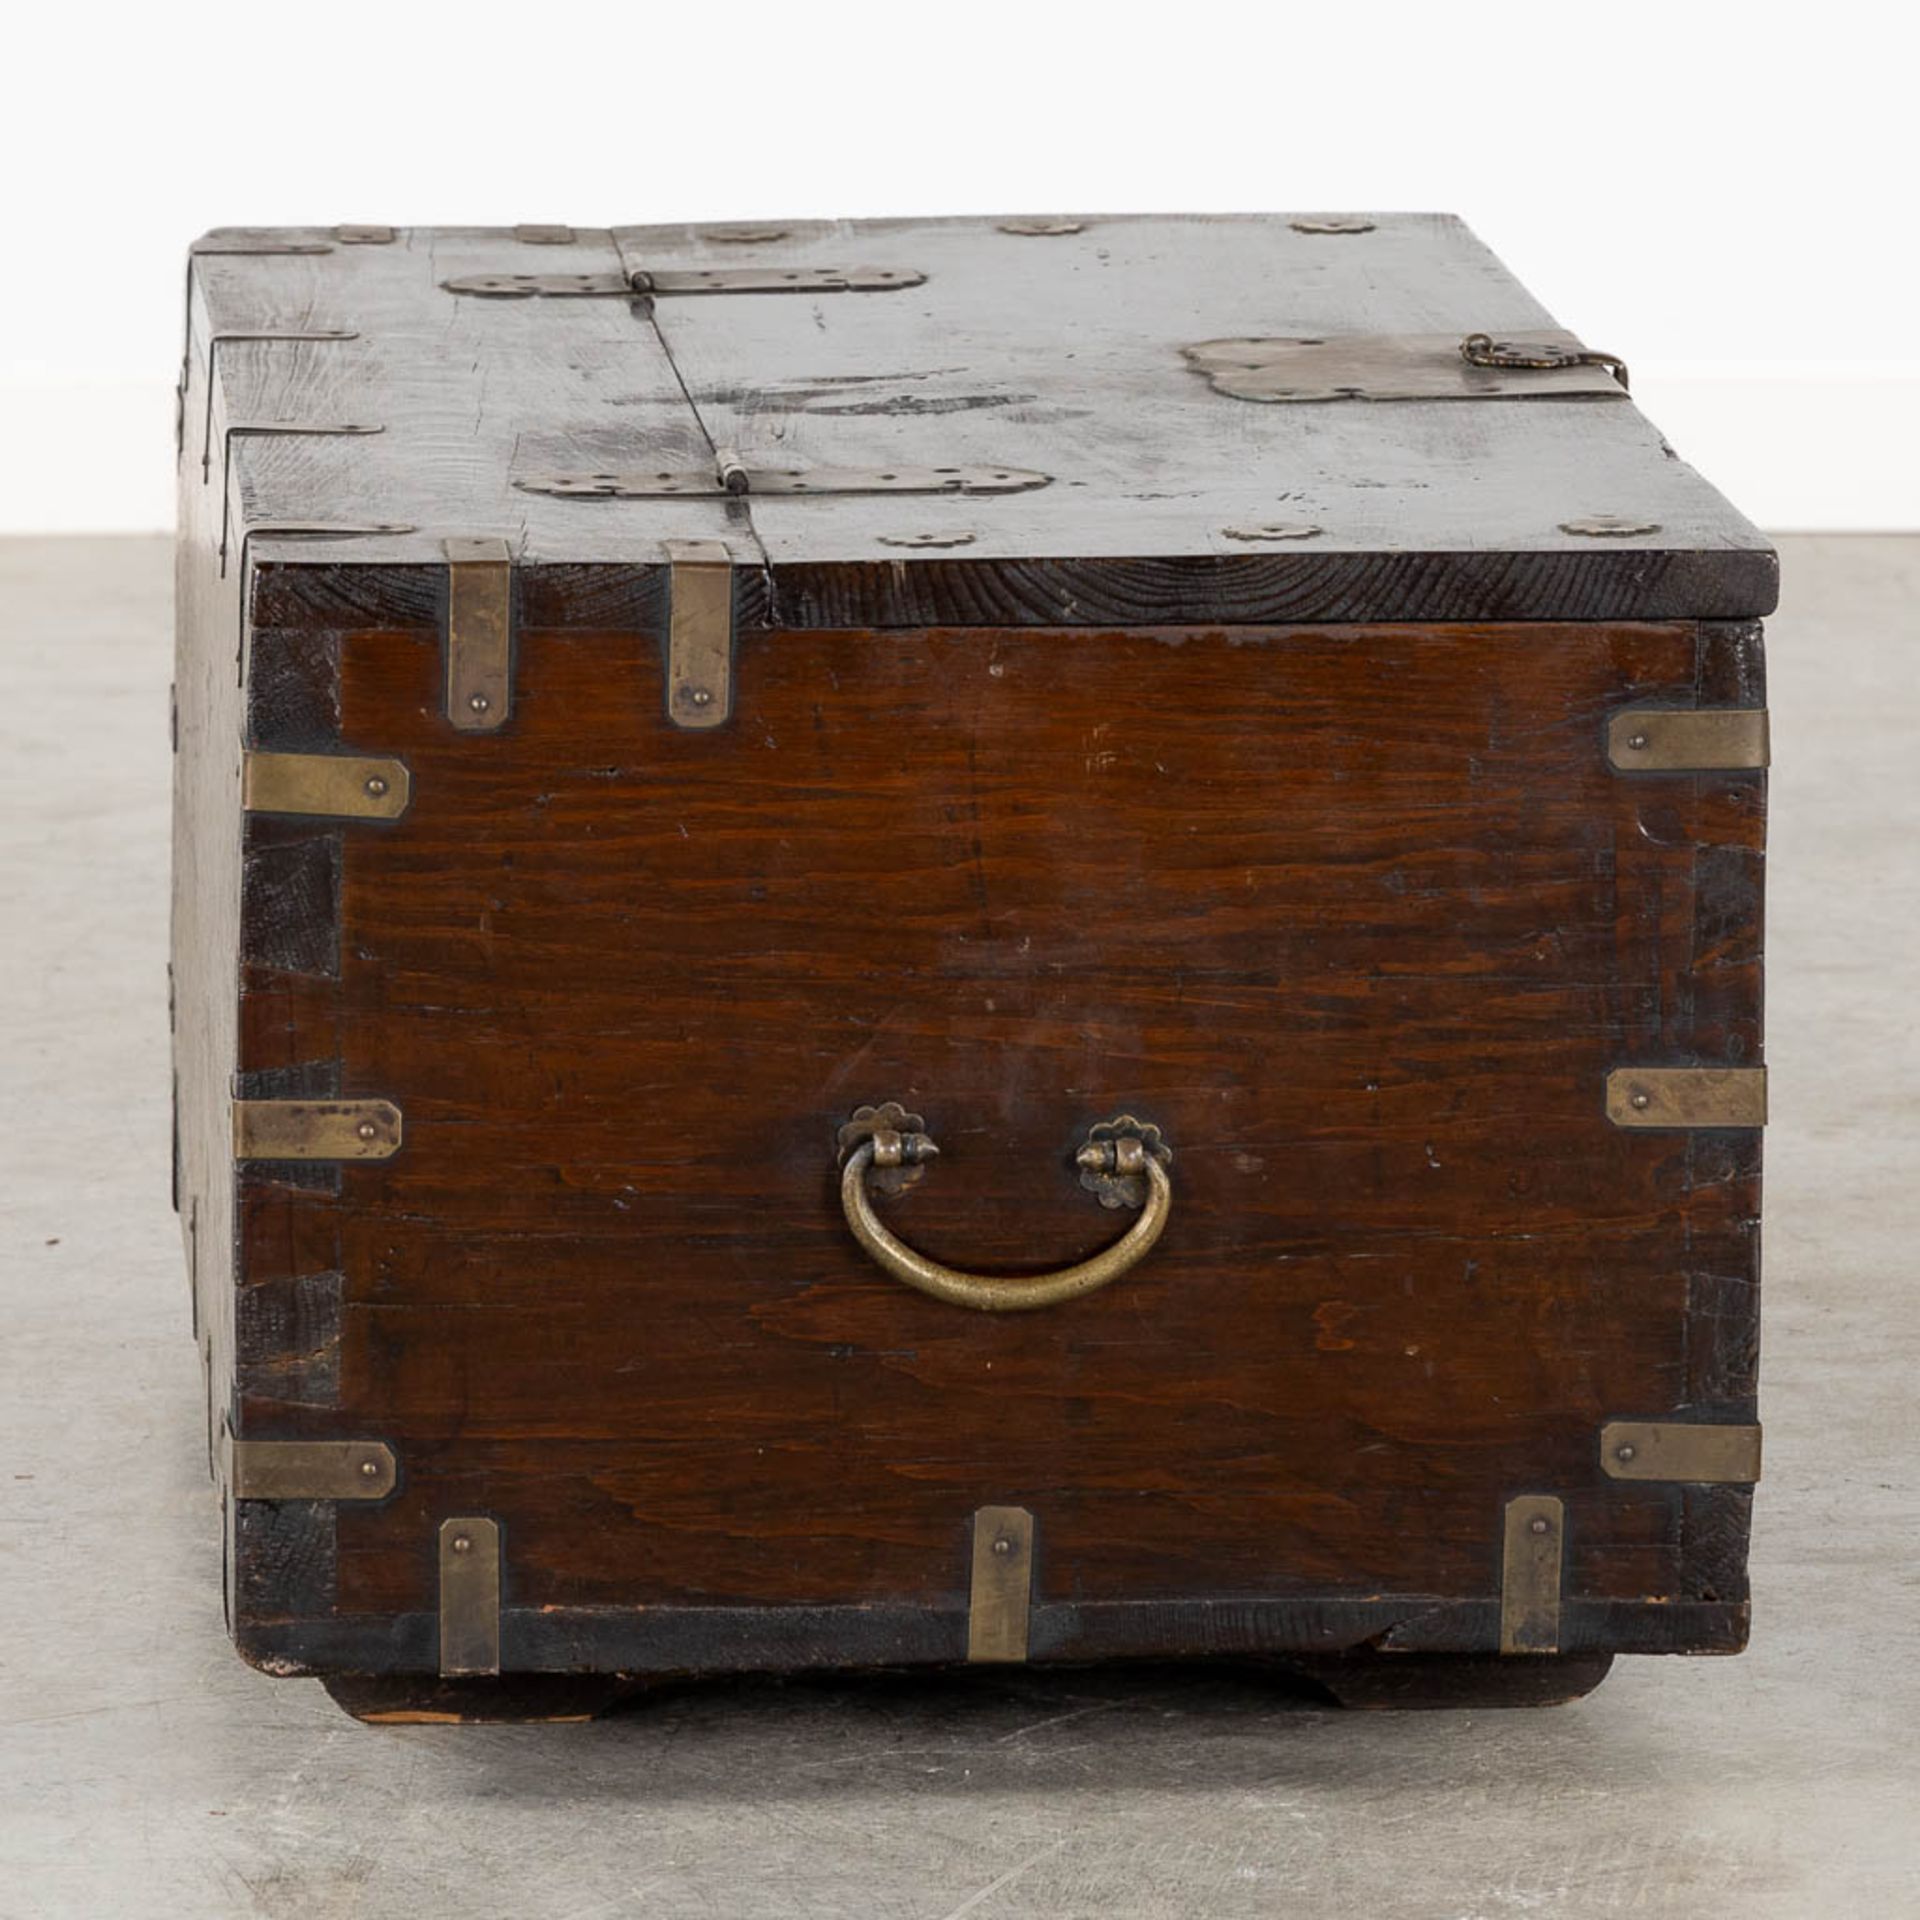 An antique Oriental chest with brass hardware. (L:43 x W:76 x H:40 cm) - Image 7 of 13